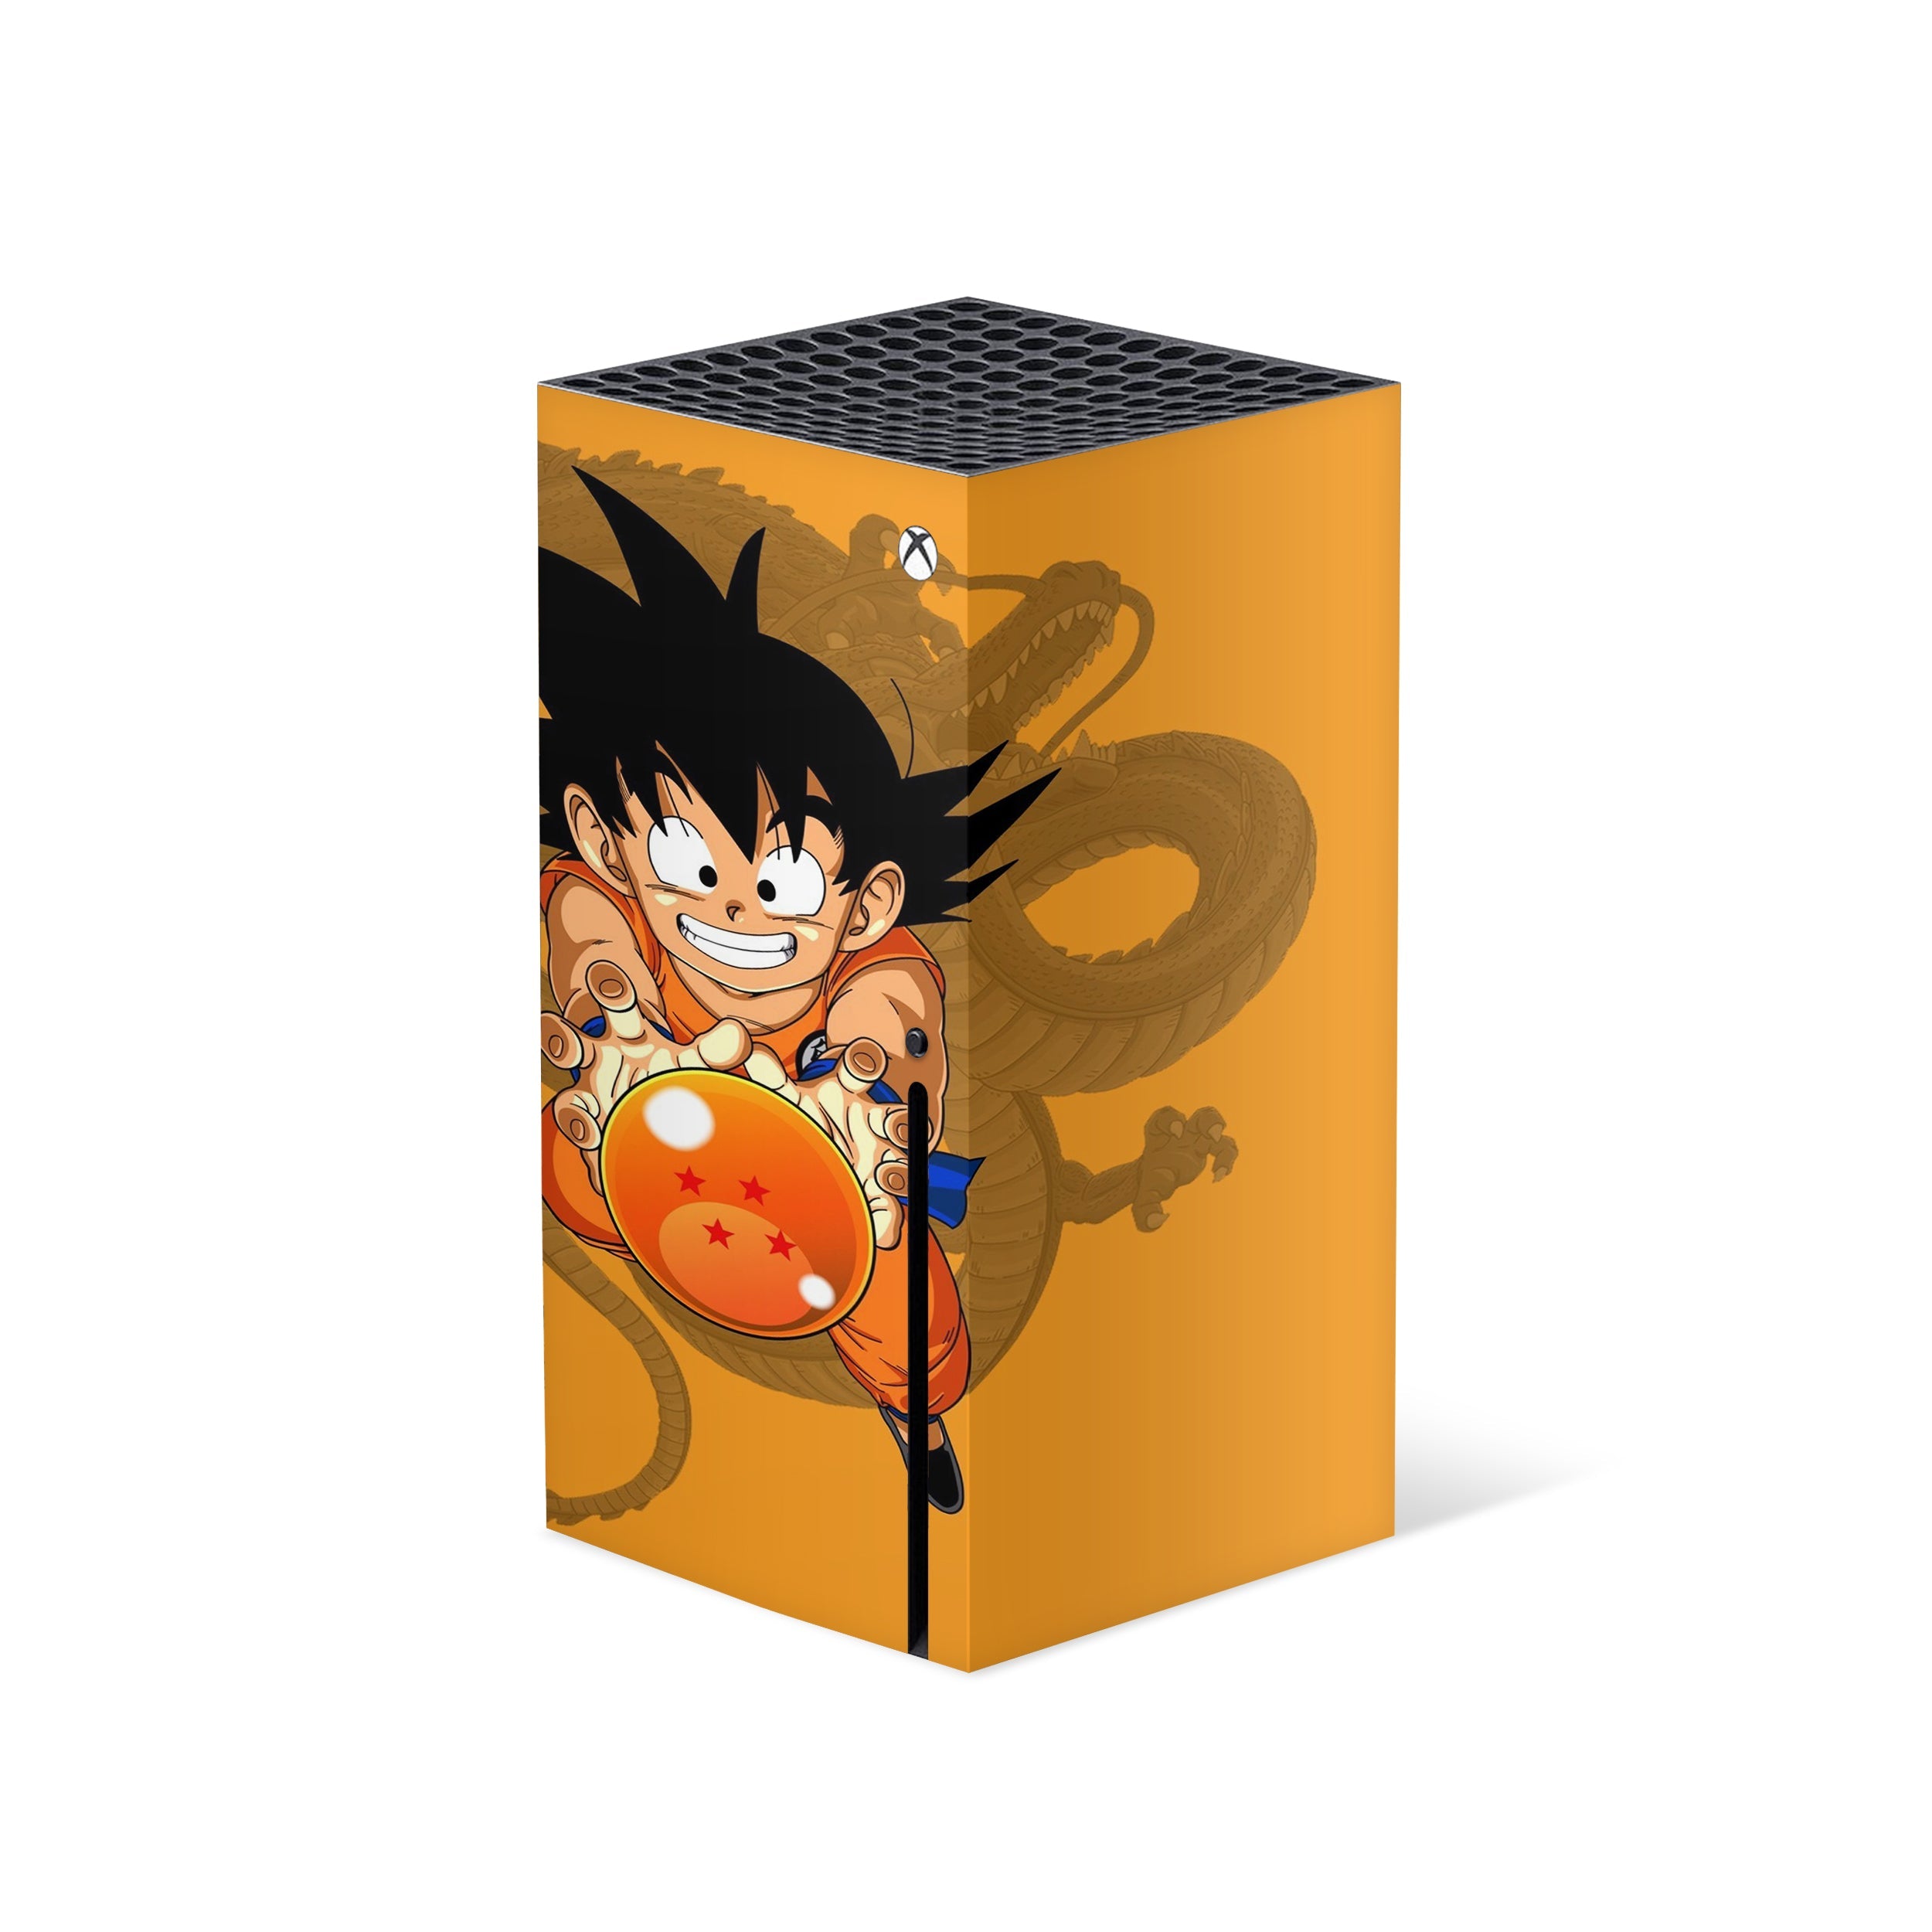 A video game skin featuring a Dragon Ball Z Goku design for the Xbox Series X.